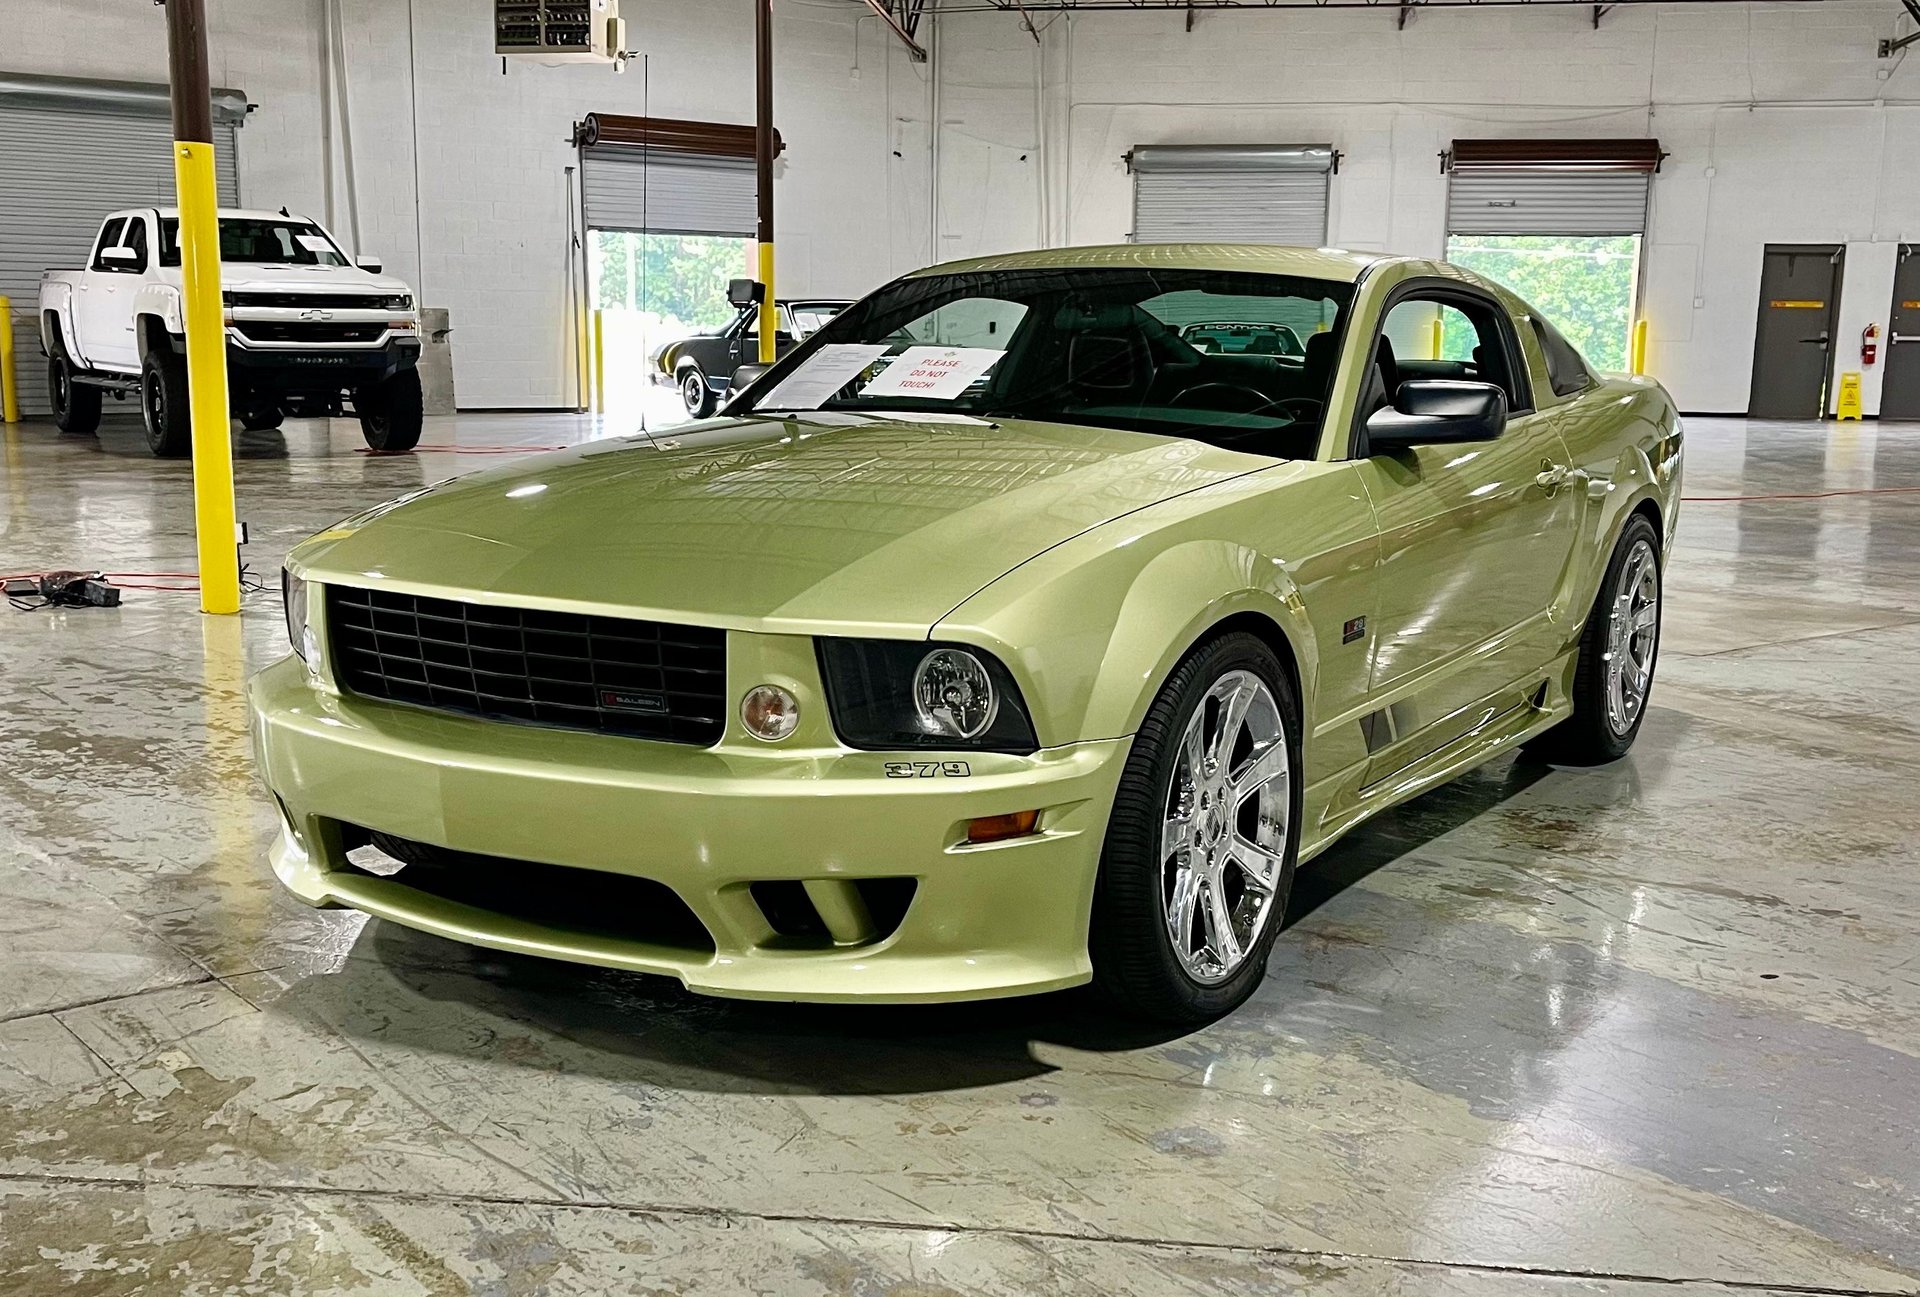 2006 Ford Saleen S281 Mustang